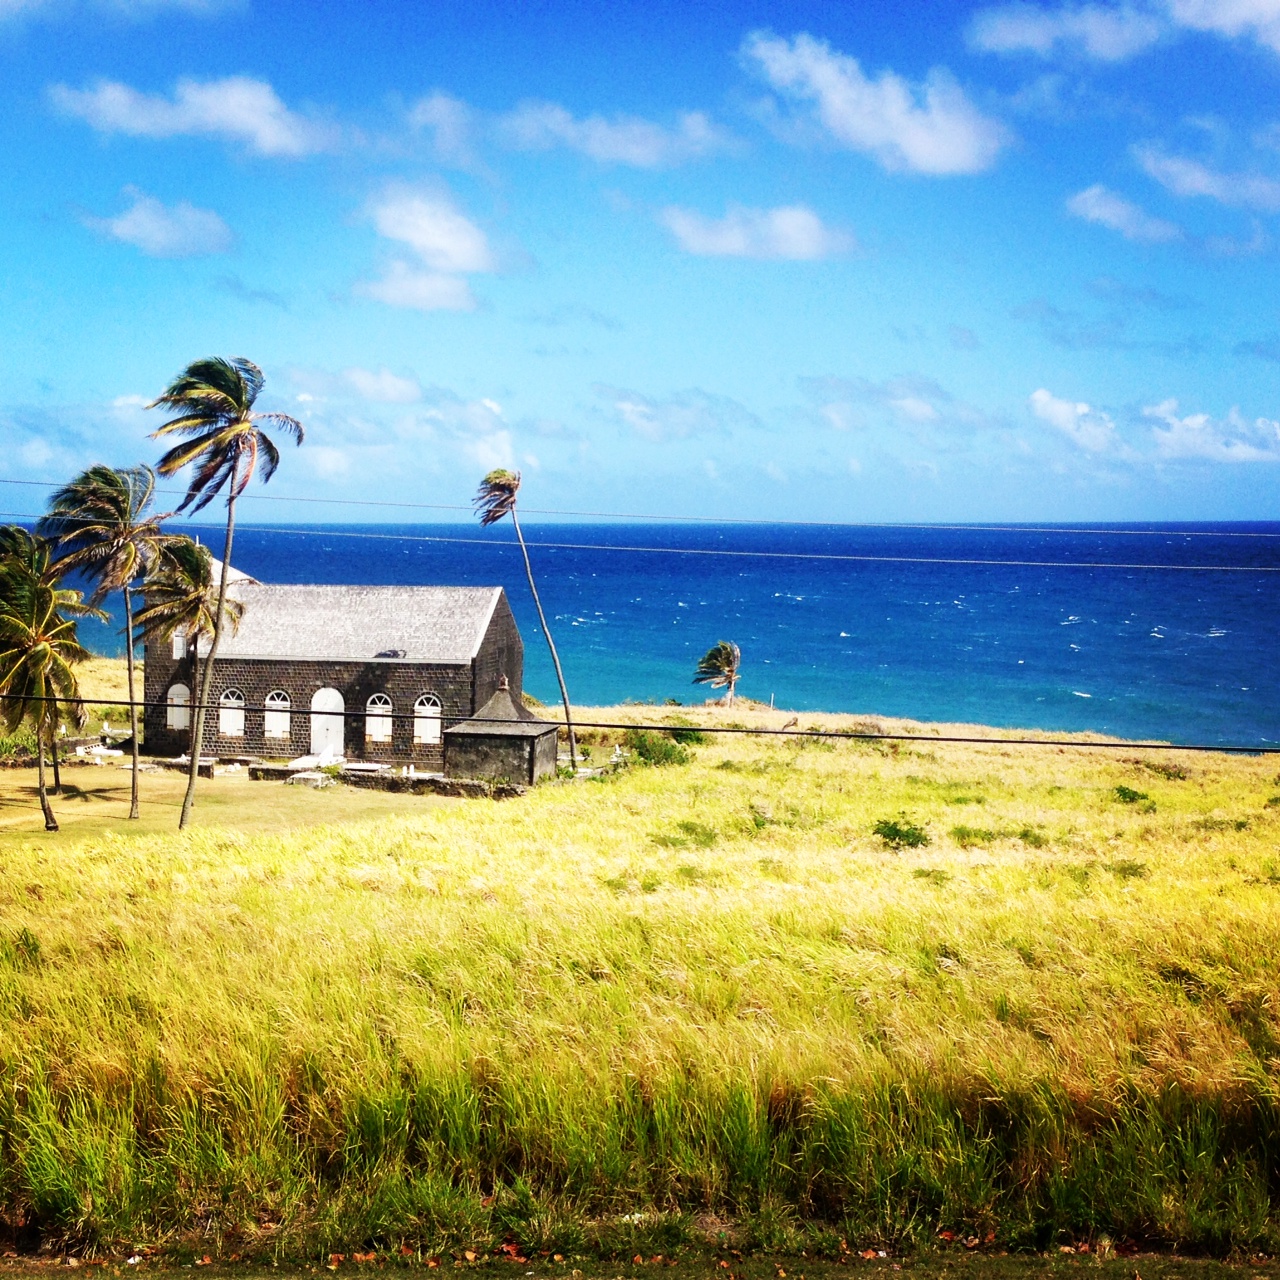 One of the oldest churches in the Western Hemisphere can be found on St. Kitts. How about that view?